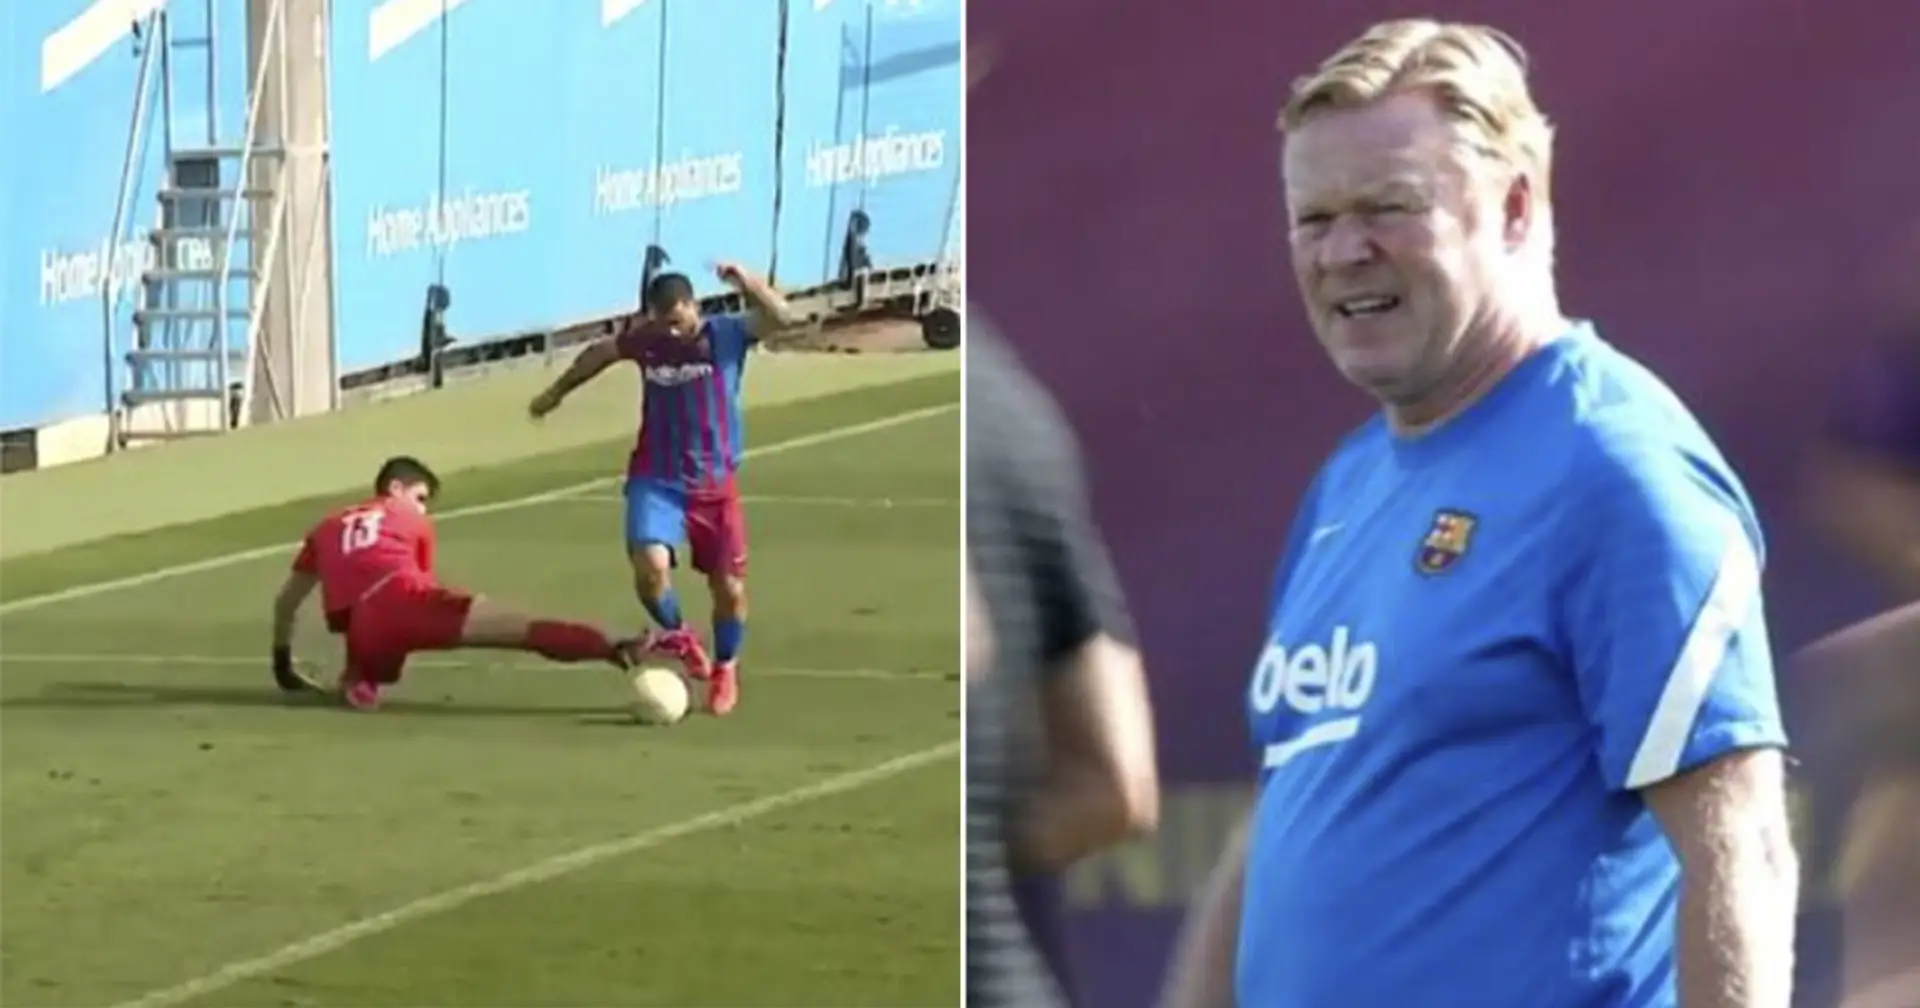 Revealed: 2 players who 'didn't impress' in friendly game vs Cornella